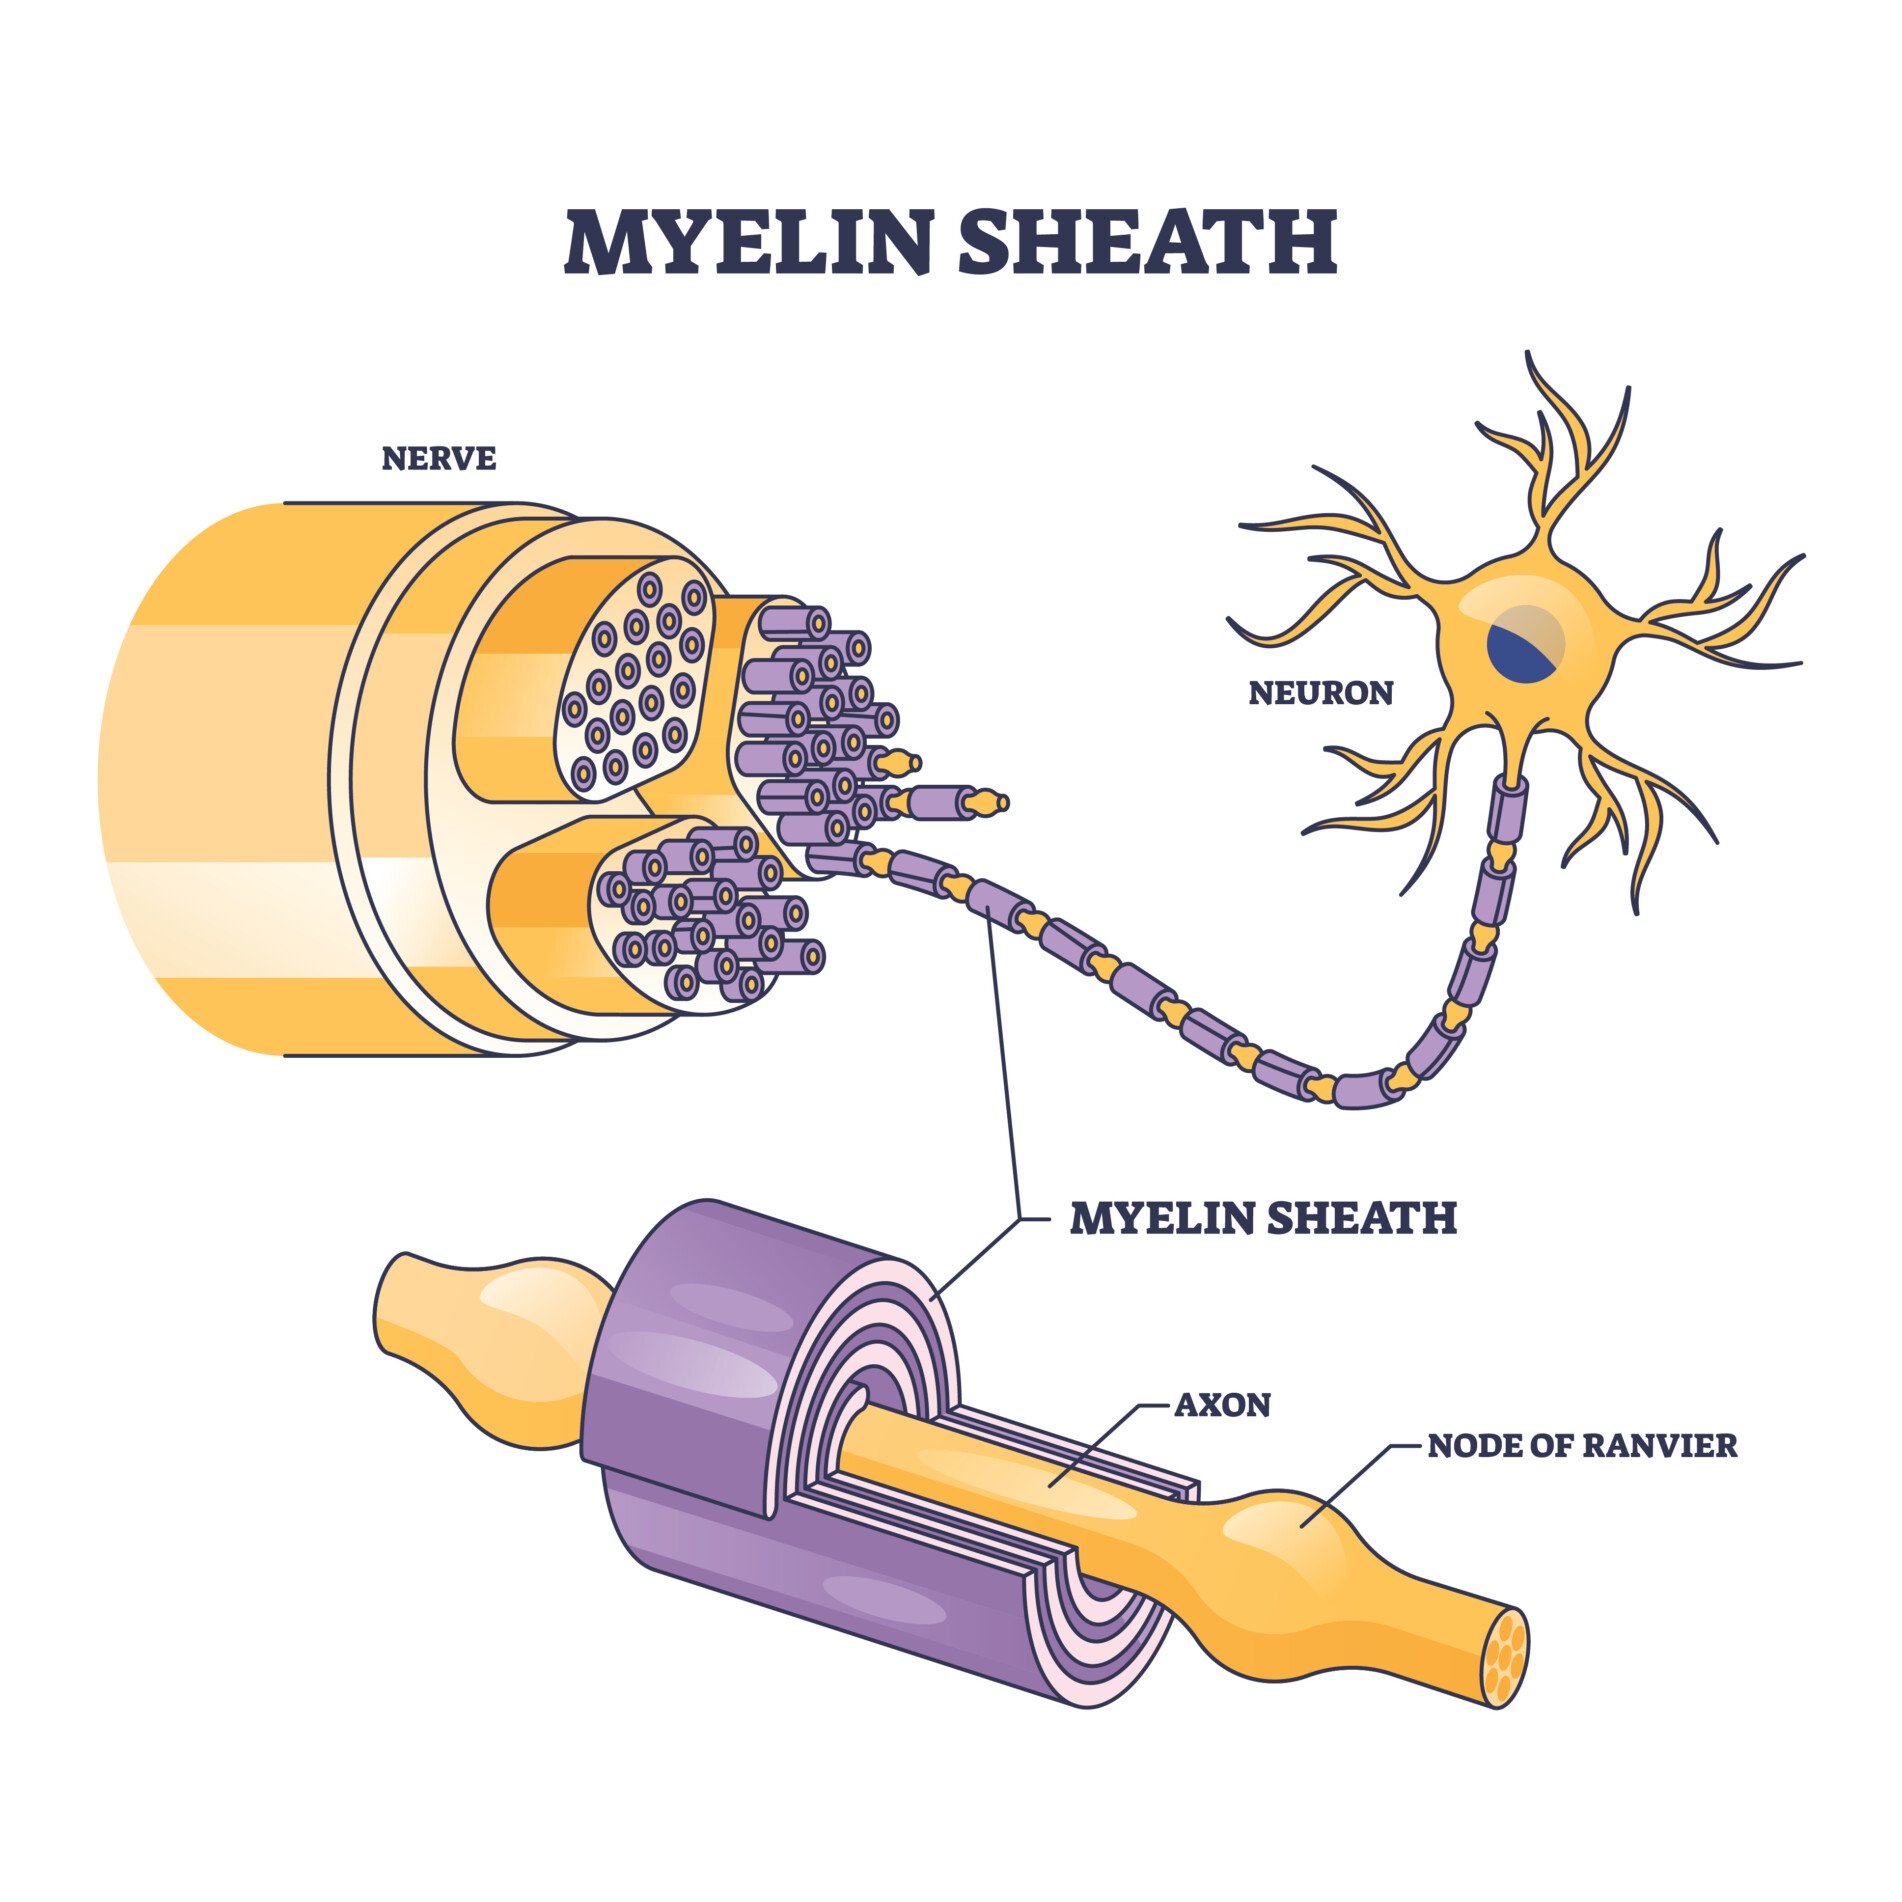 Myelin sheath as insulation layer for brain or spinal nerve outline diagram. Labeled educational anatomical scheme with physiological neuron, axon and node of ranvier location